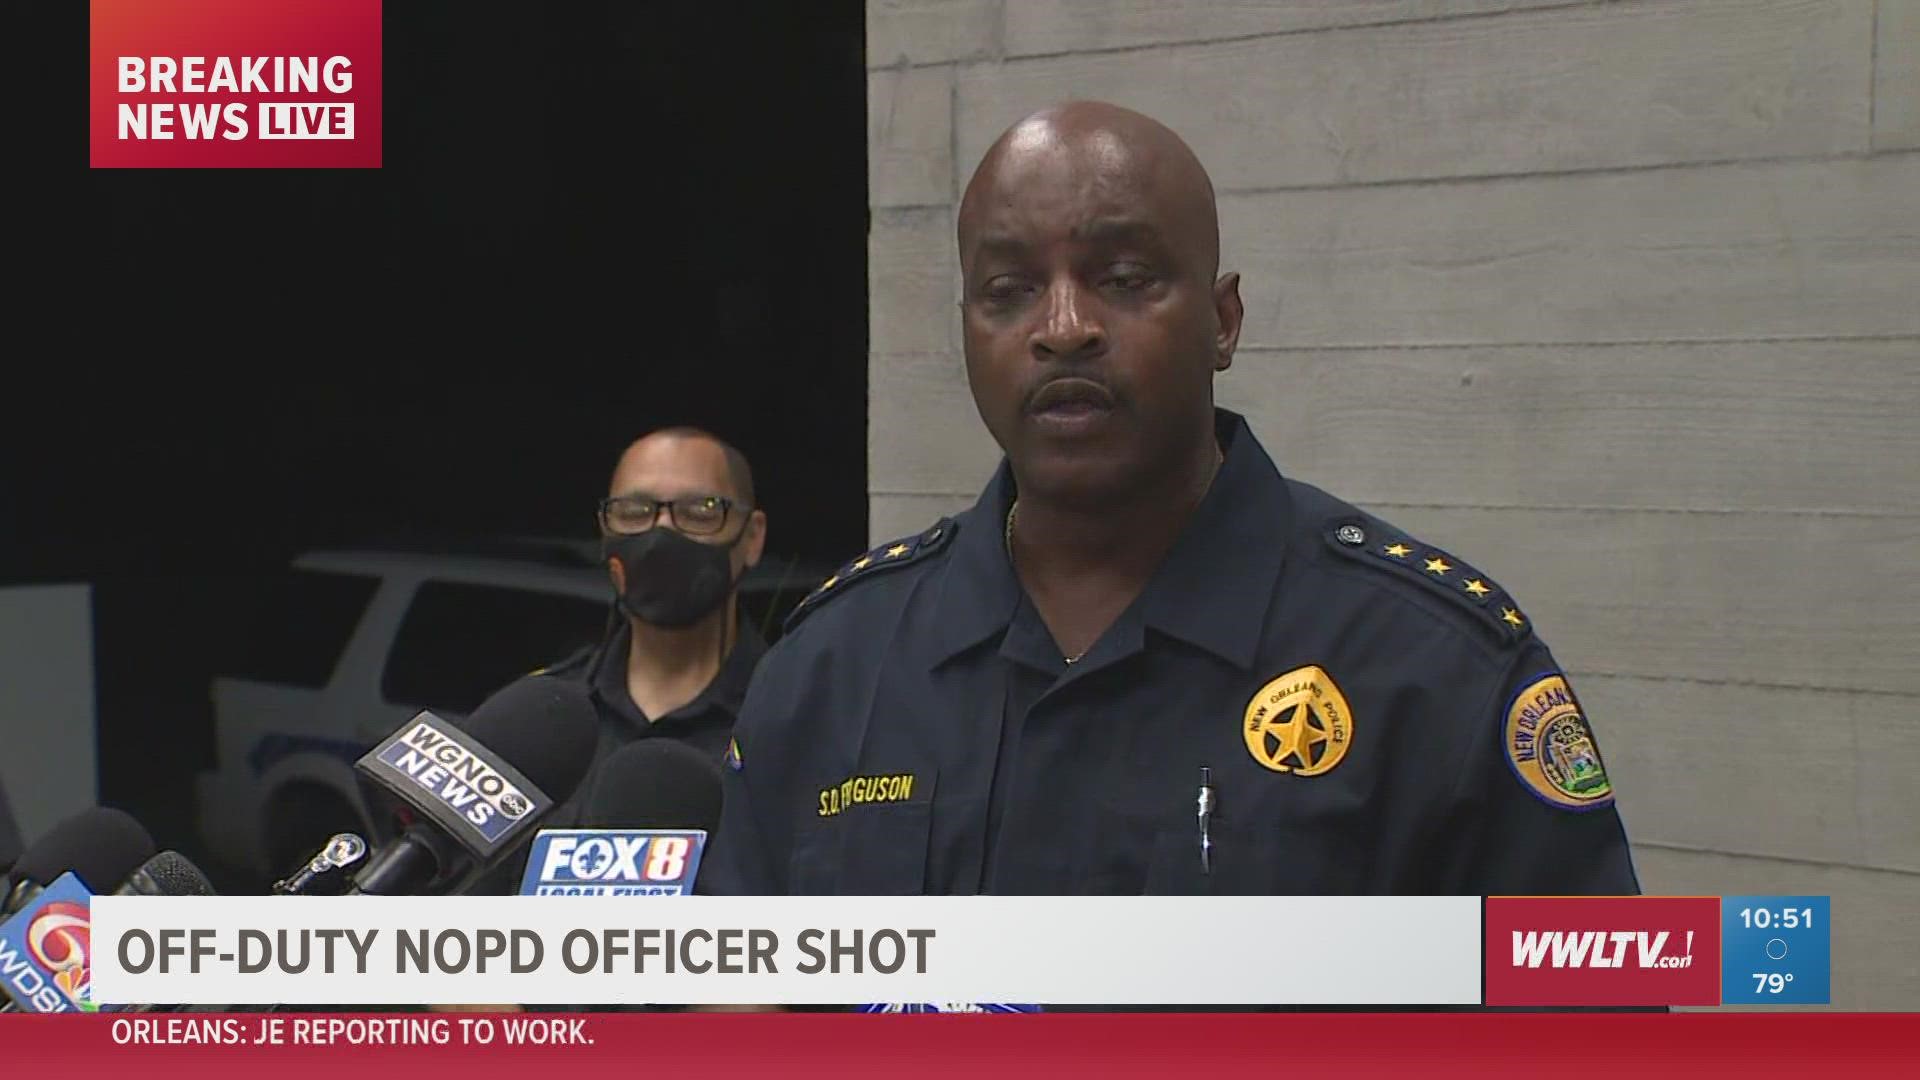 An off duty NOPD officer sustained a deep graze wound to the head Tuesday night after a shooting near St. Bernard Ave exit.